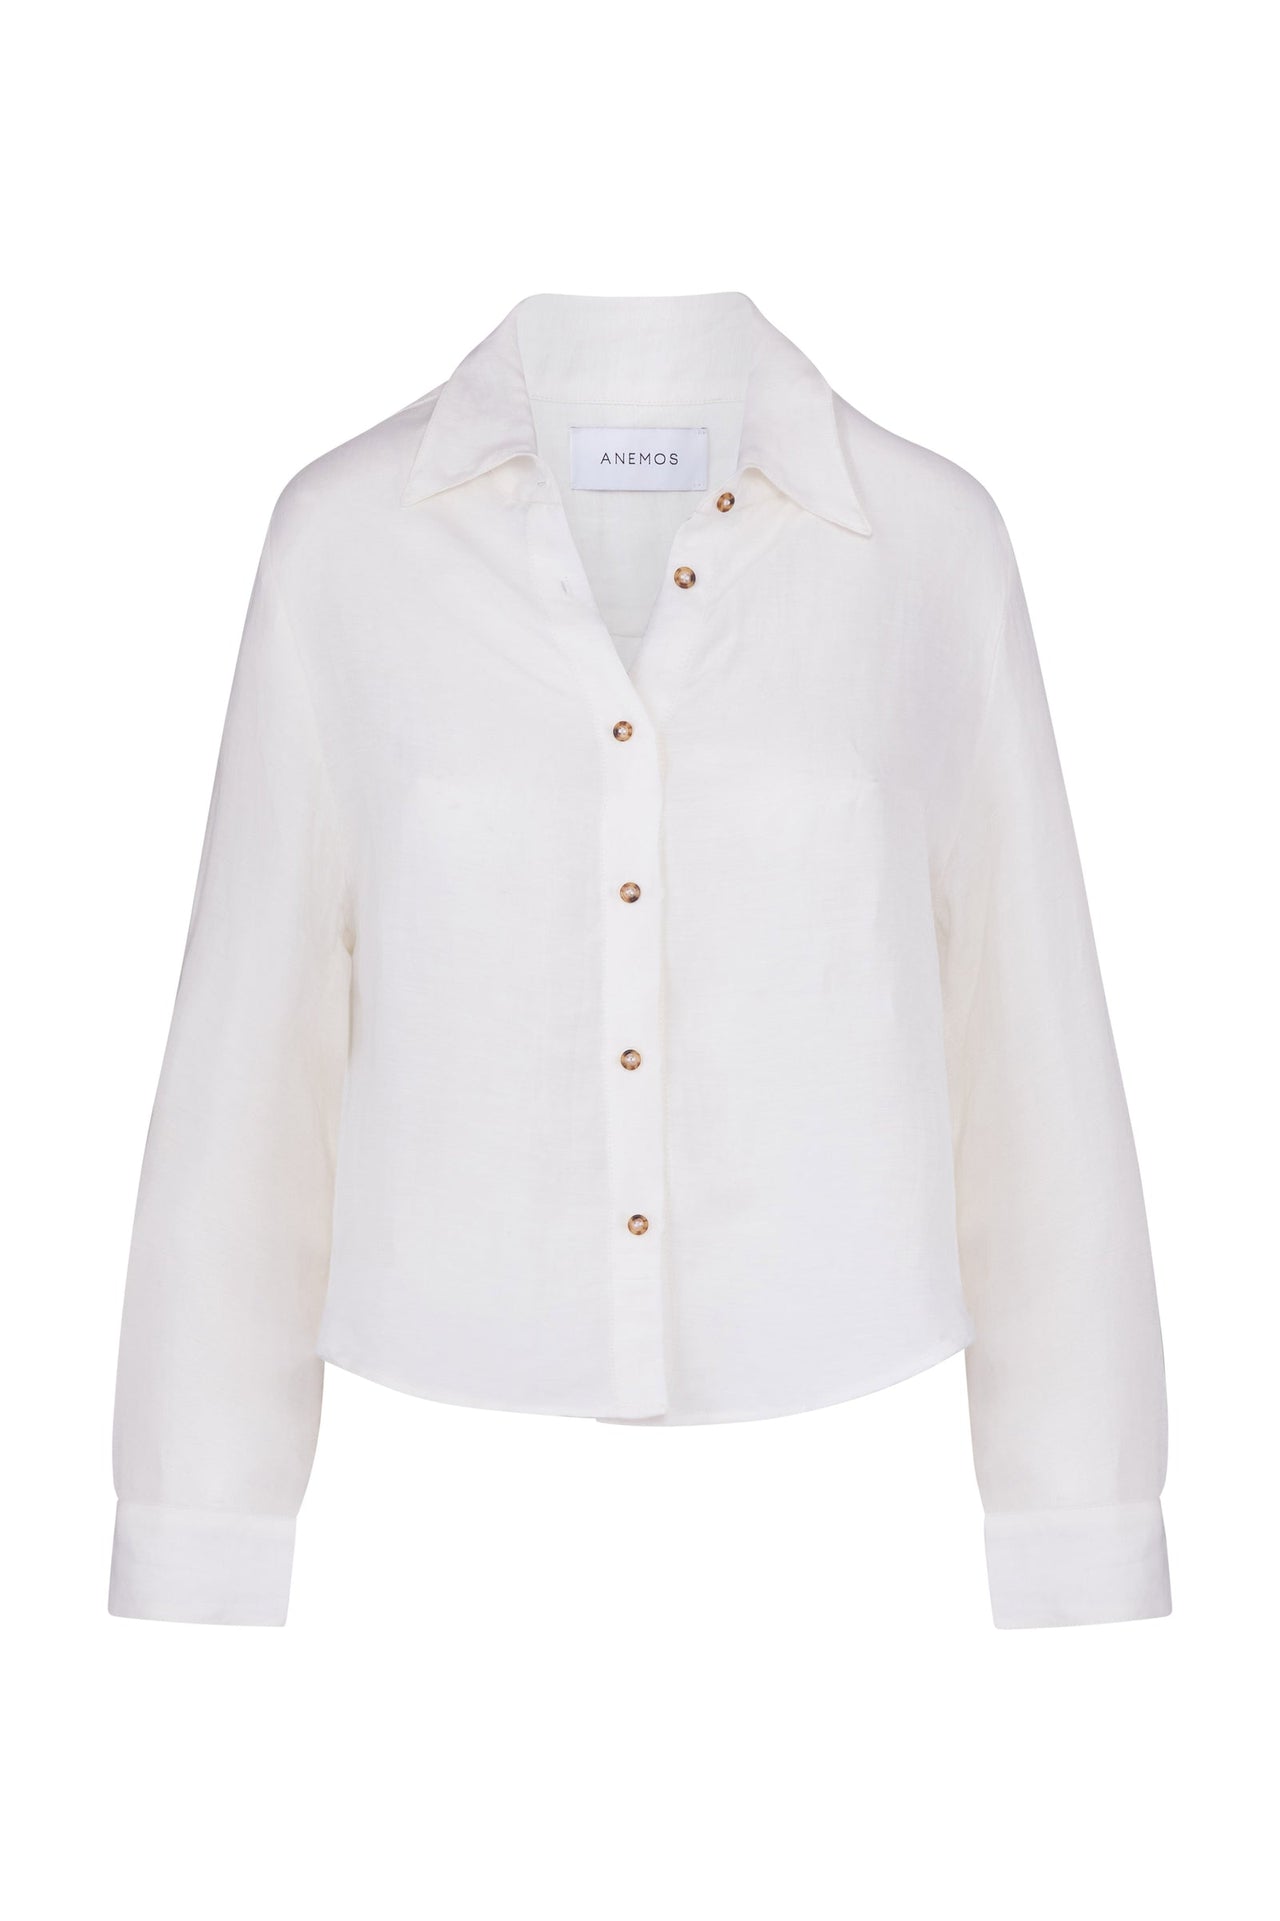 ANEMOS THE PHILLIPS BUTTON DOWN SHIRT - 3 COLORS